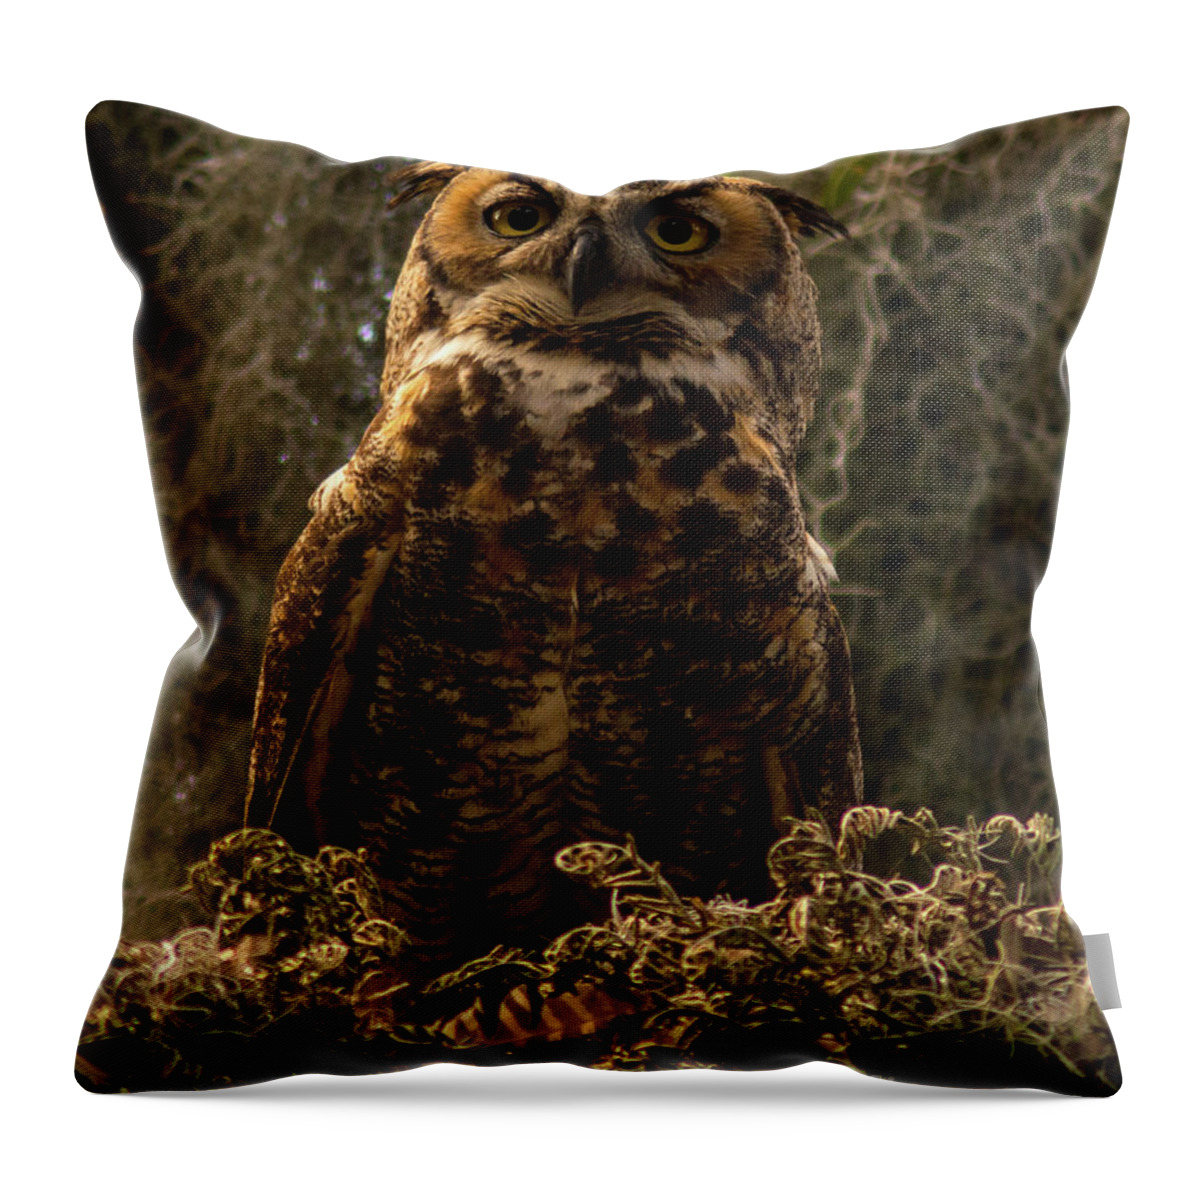 Owl Throw Pillow featuring the photograph Mother Owl Posing by Jane Axman